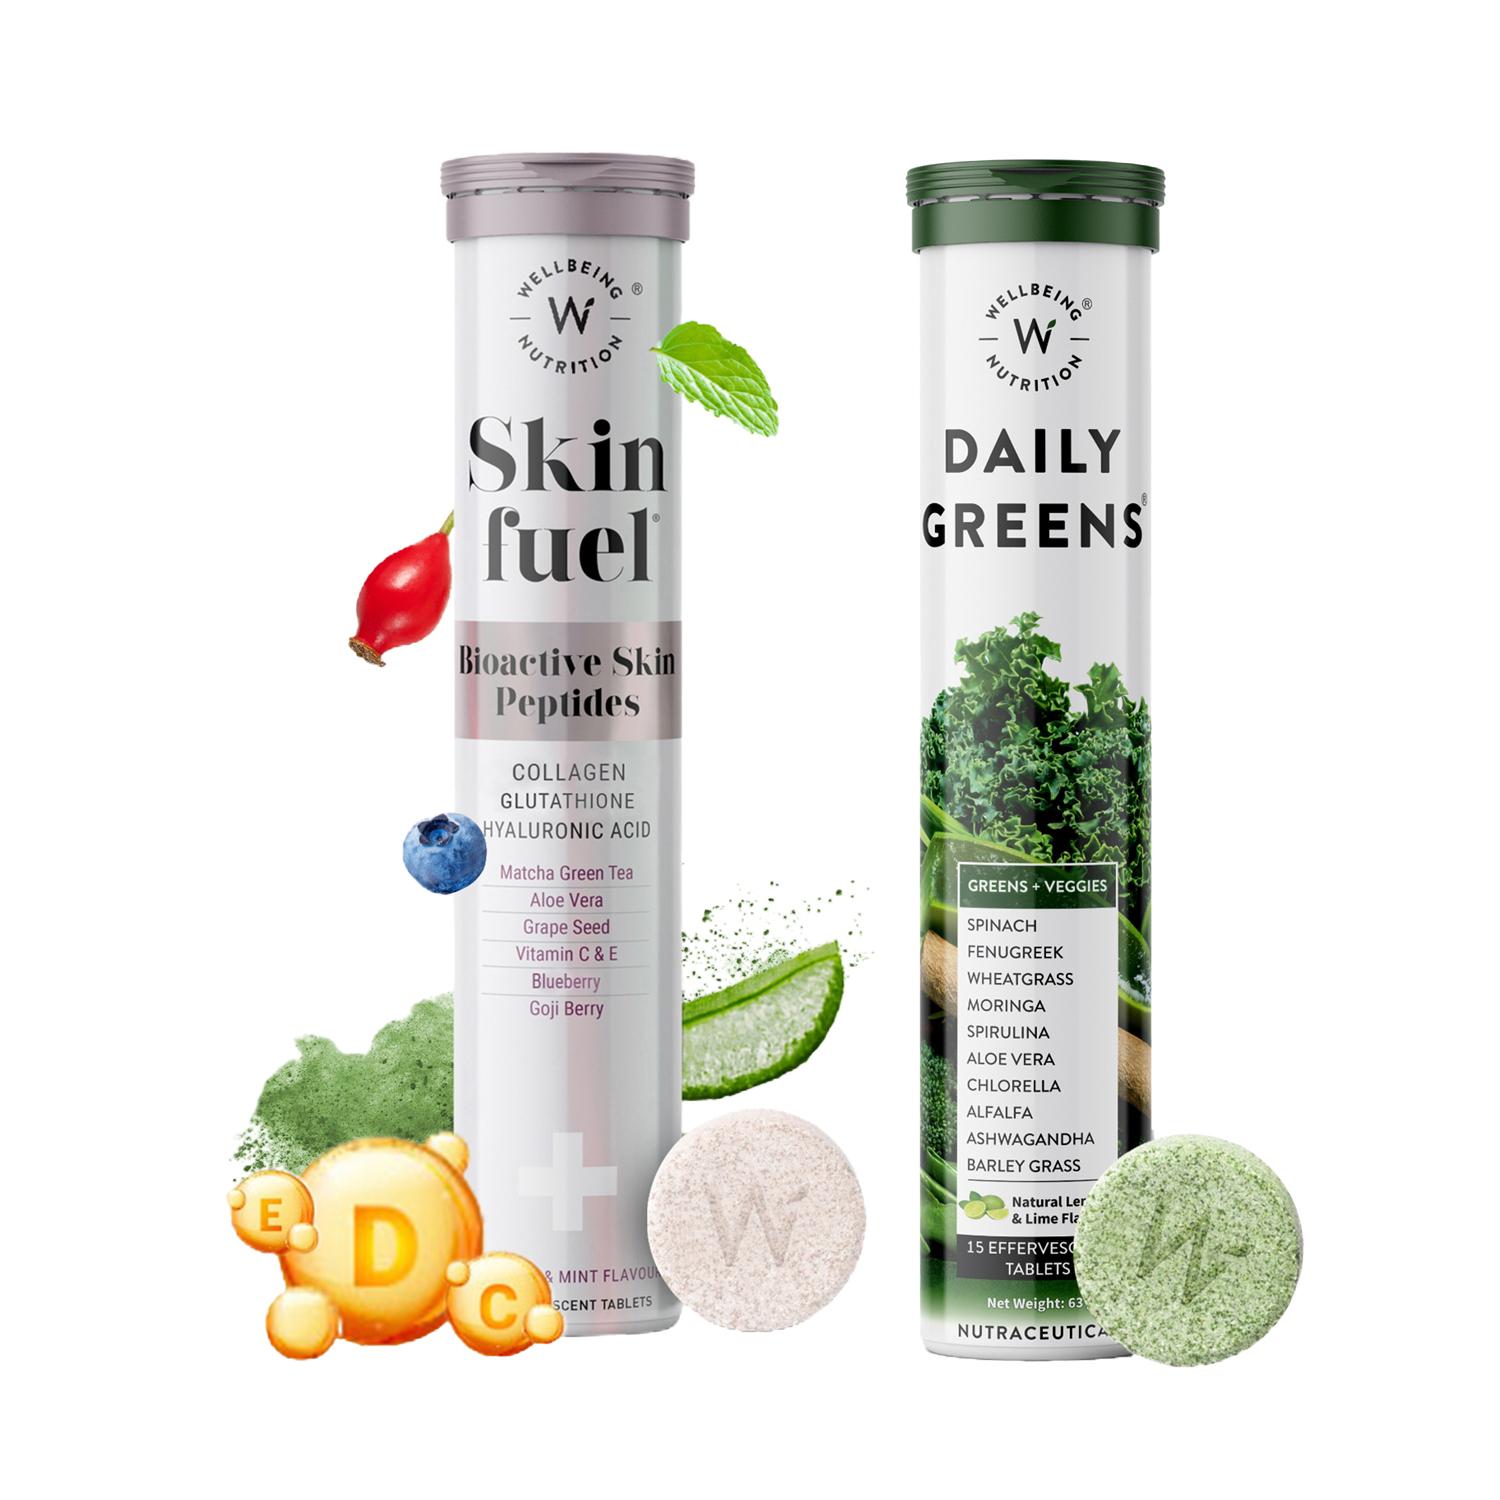 Wellbeing Nutrition | Wellbeing Nutrition Combo Daily Greens Wholefood Multivitamin & Skin Fuel Skin Fule Effervescent